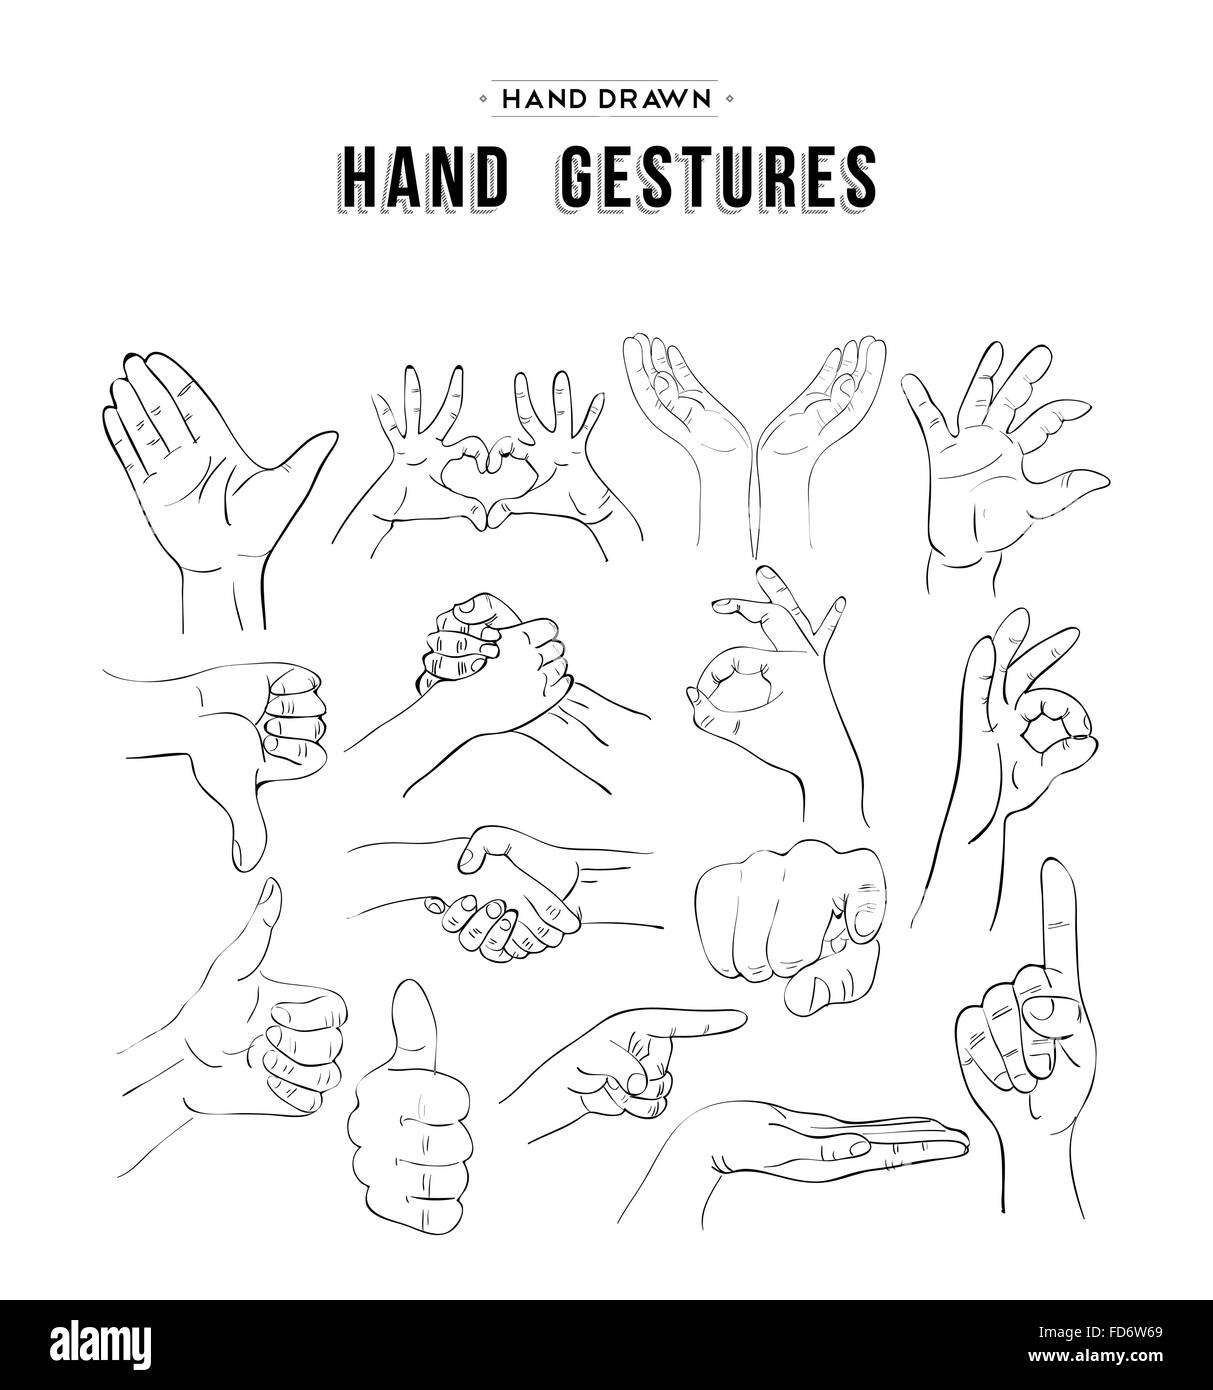 Handmade sketches set of hand gesture signs. Universal social communication icons. EPS10 vector. Stock Vector